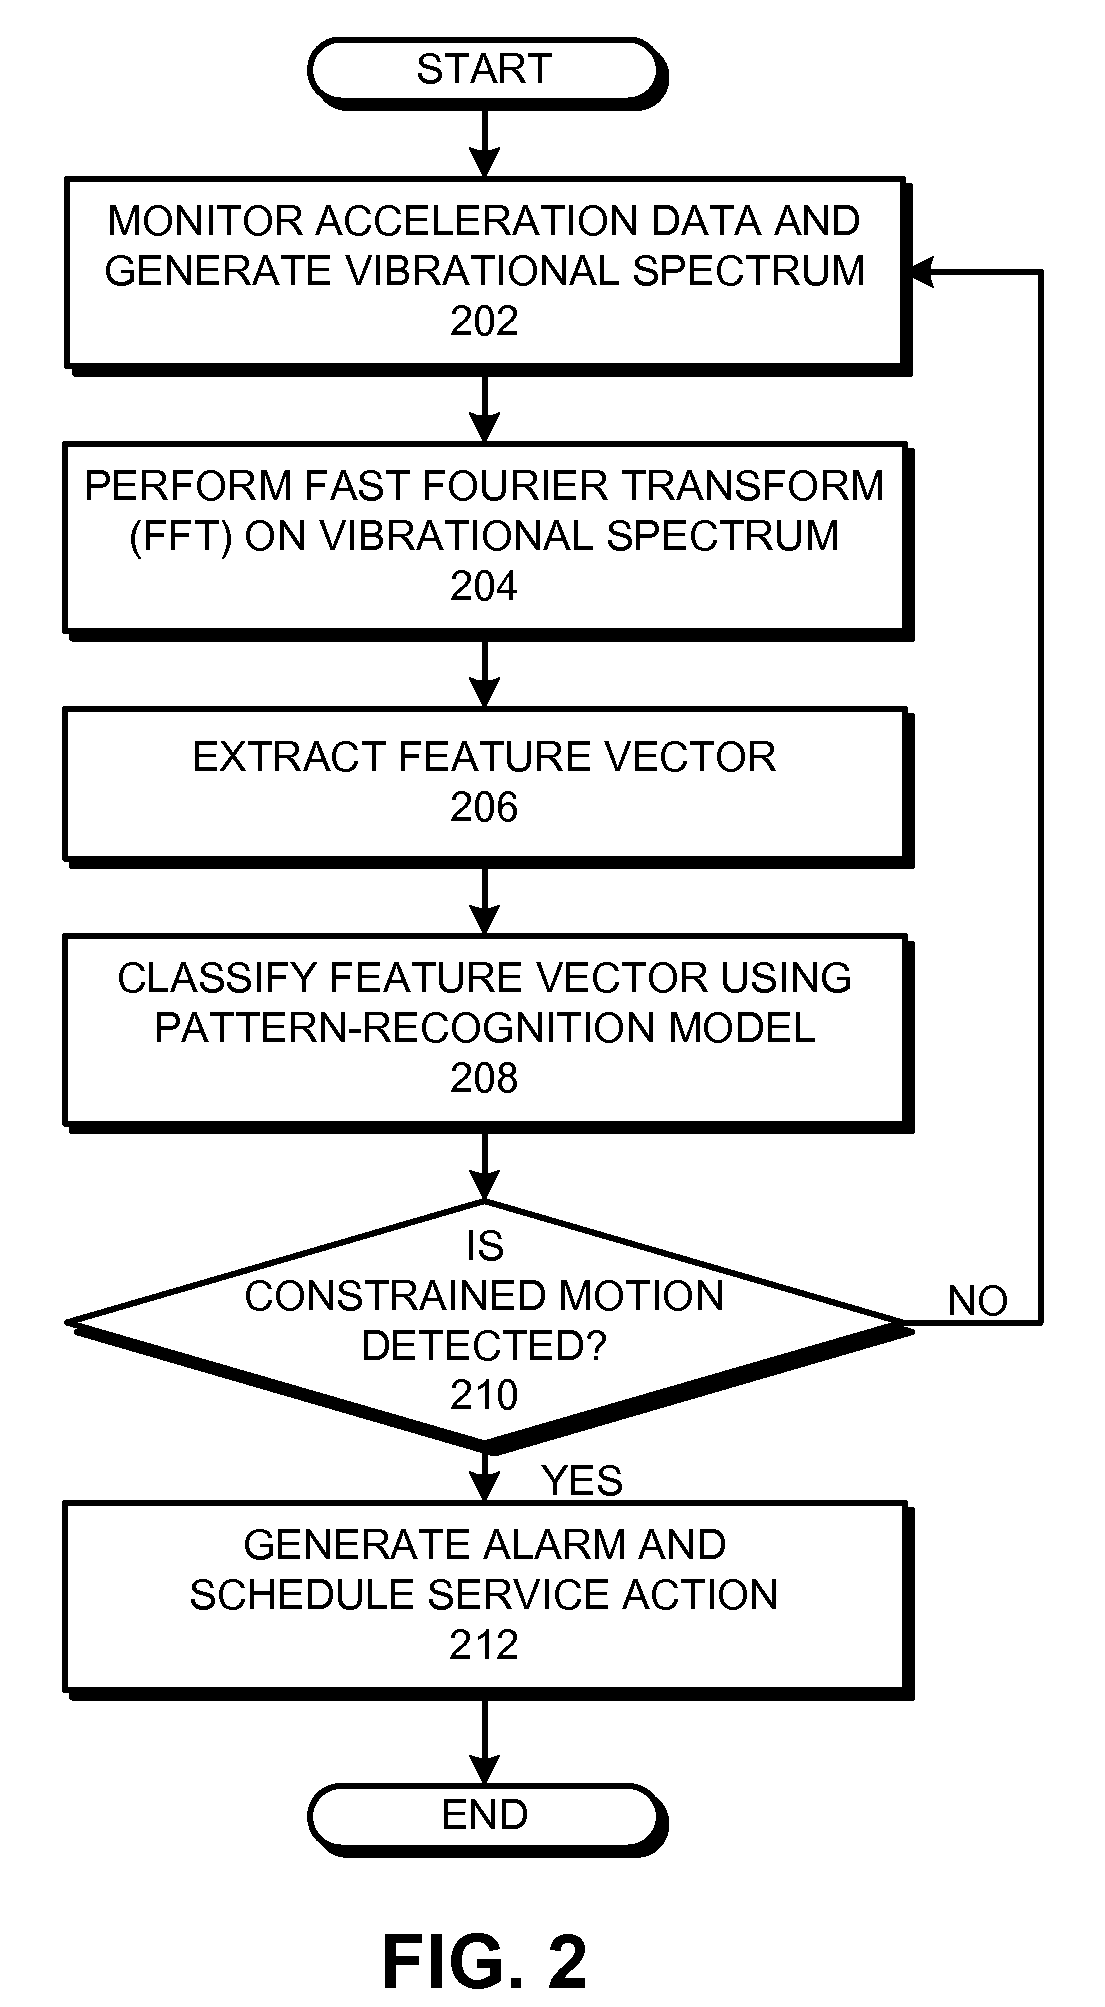 Detecting constrained motion of a component in a computer system